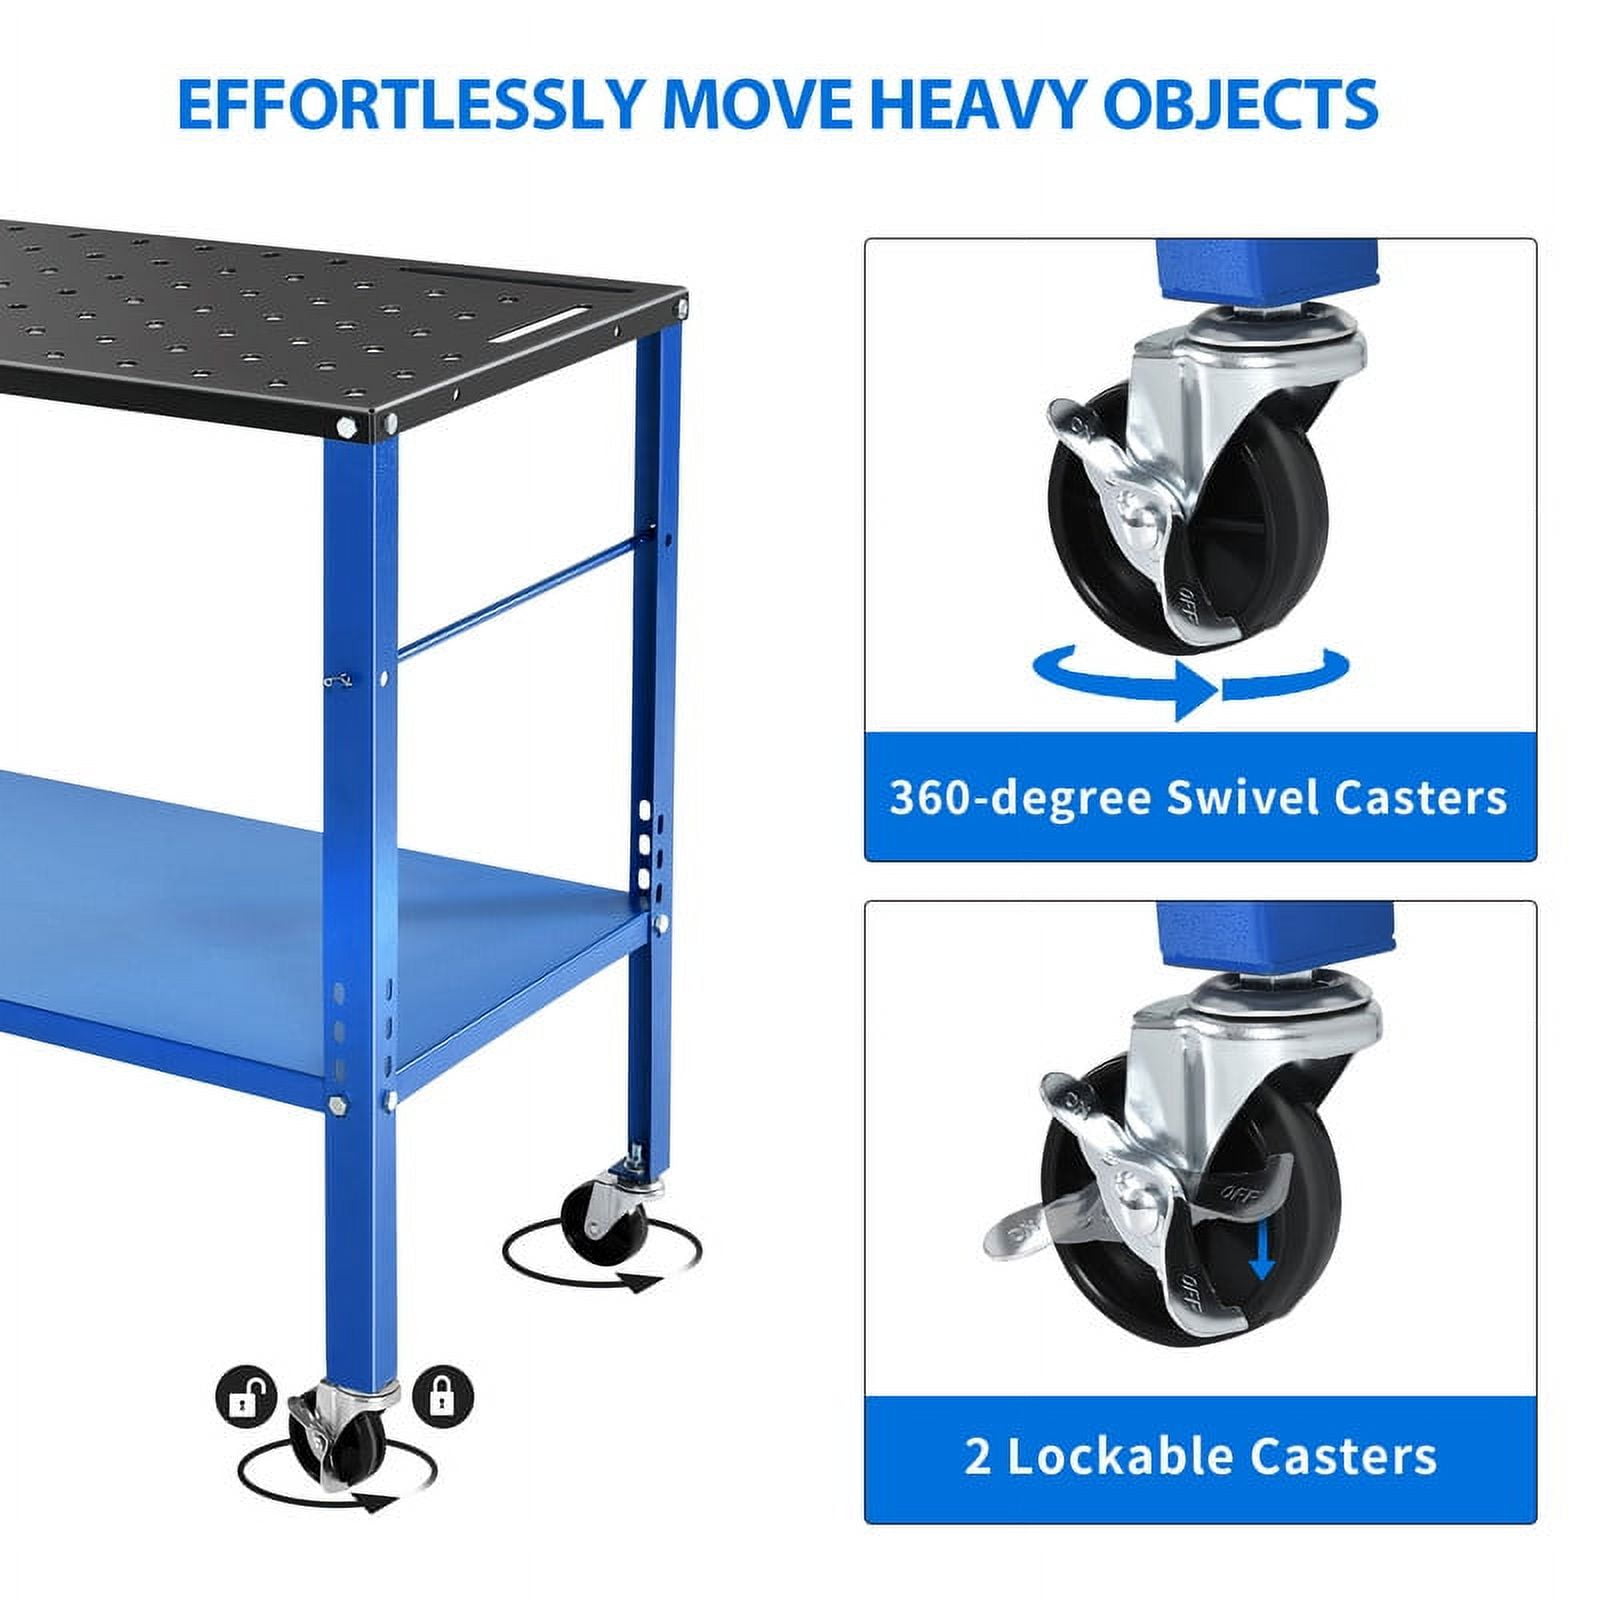 HEAVY DUTY WELDING TABLES, Size W x D x H: 96 x 48 x 36, Top: 3/4,  Optional Casters: Included